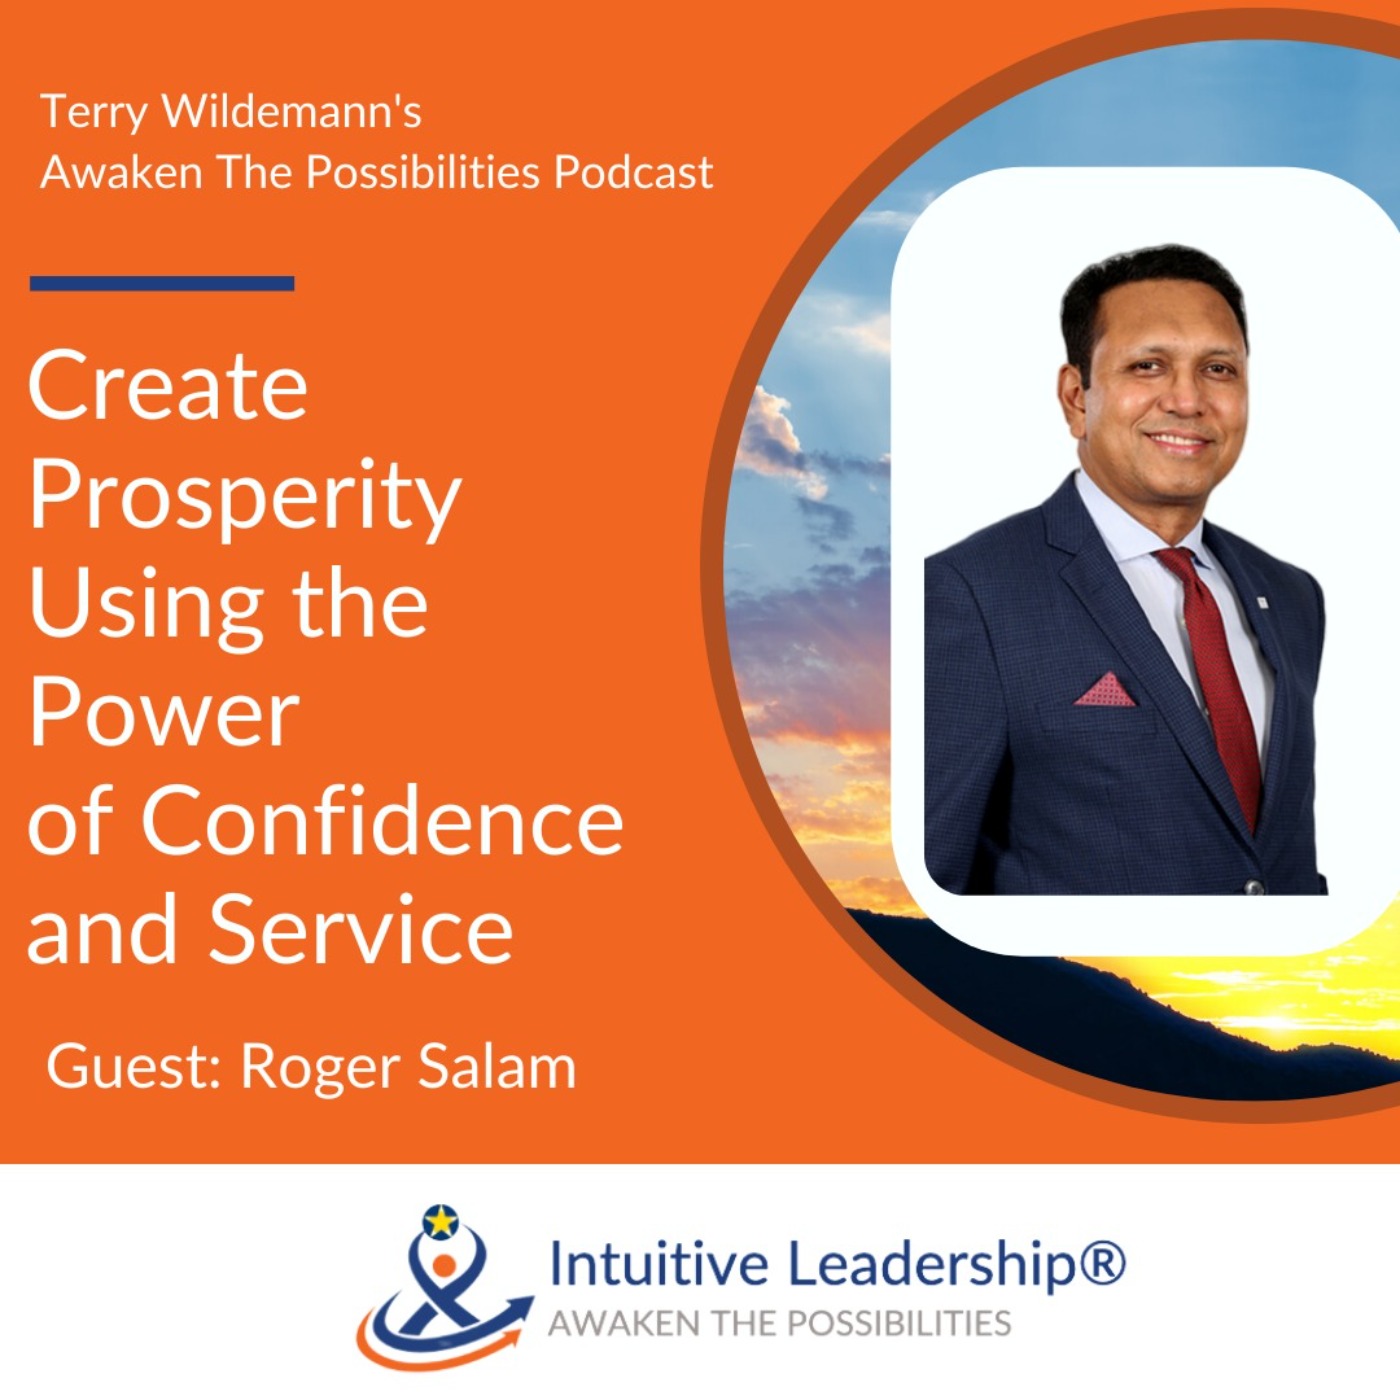 Awaken The Possibilities: Create Prosperity Using The Power of Confidence and Service